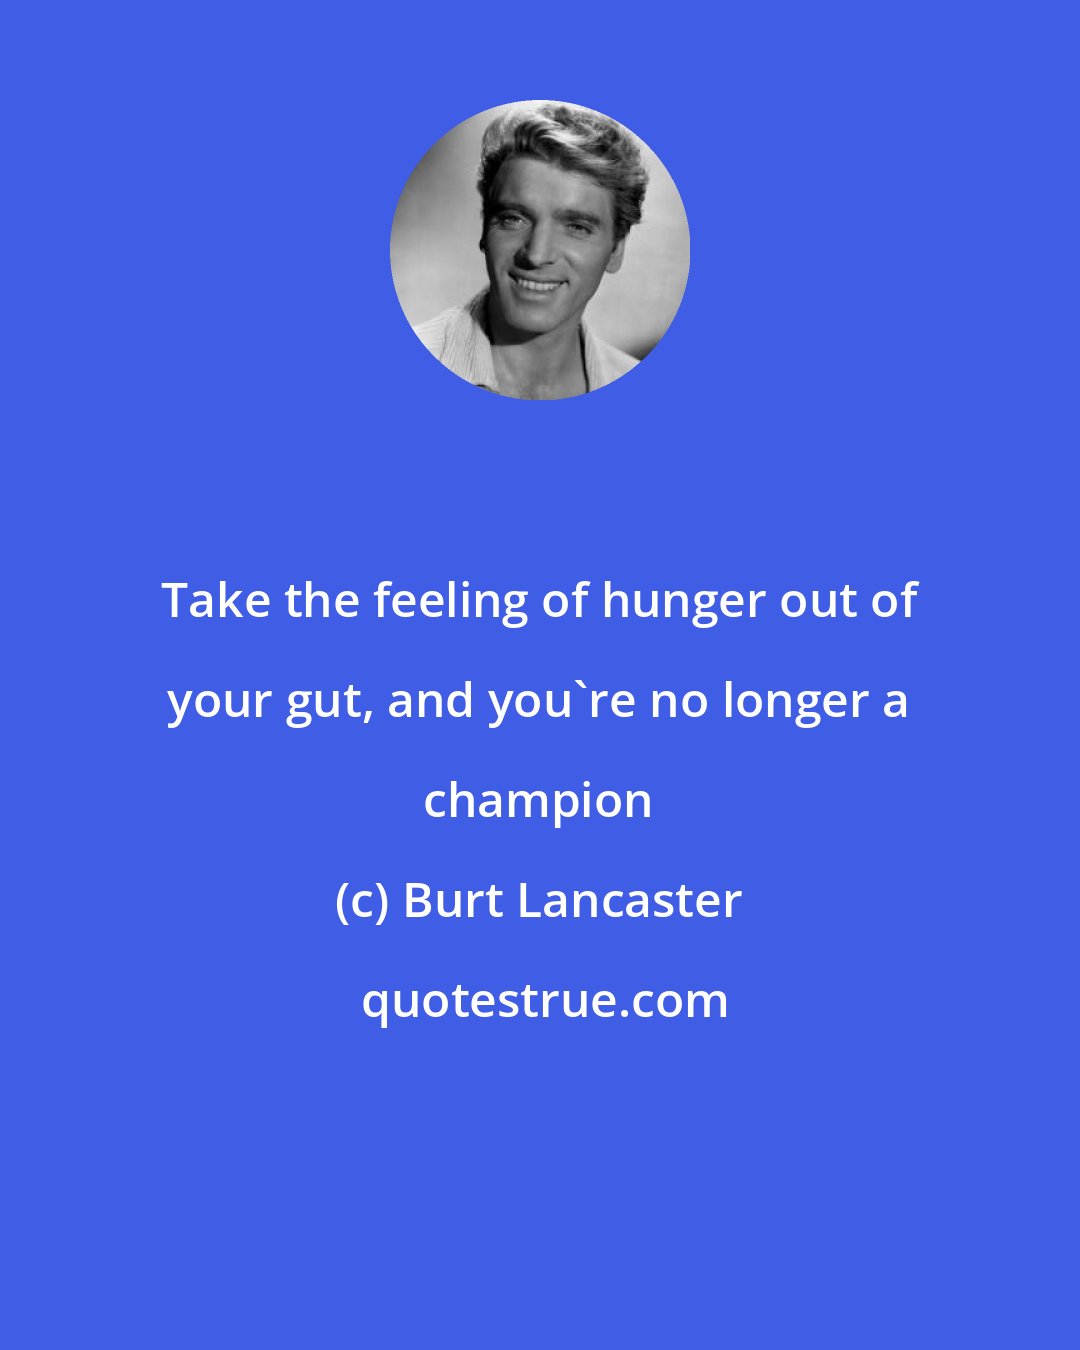 Burt Lancaster: Take the feeling of hunger out of your gut, and you're no longer a champion